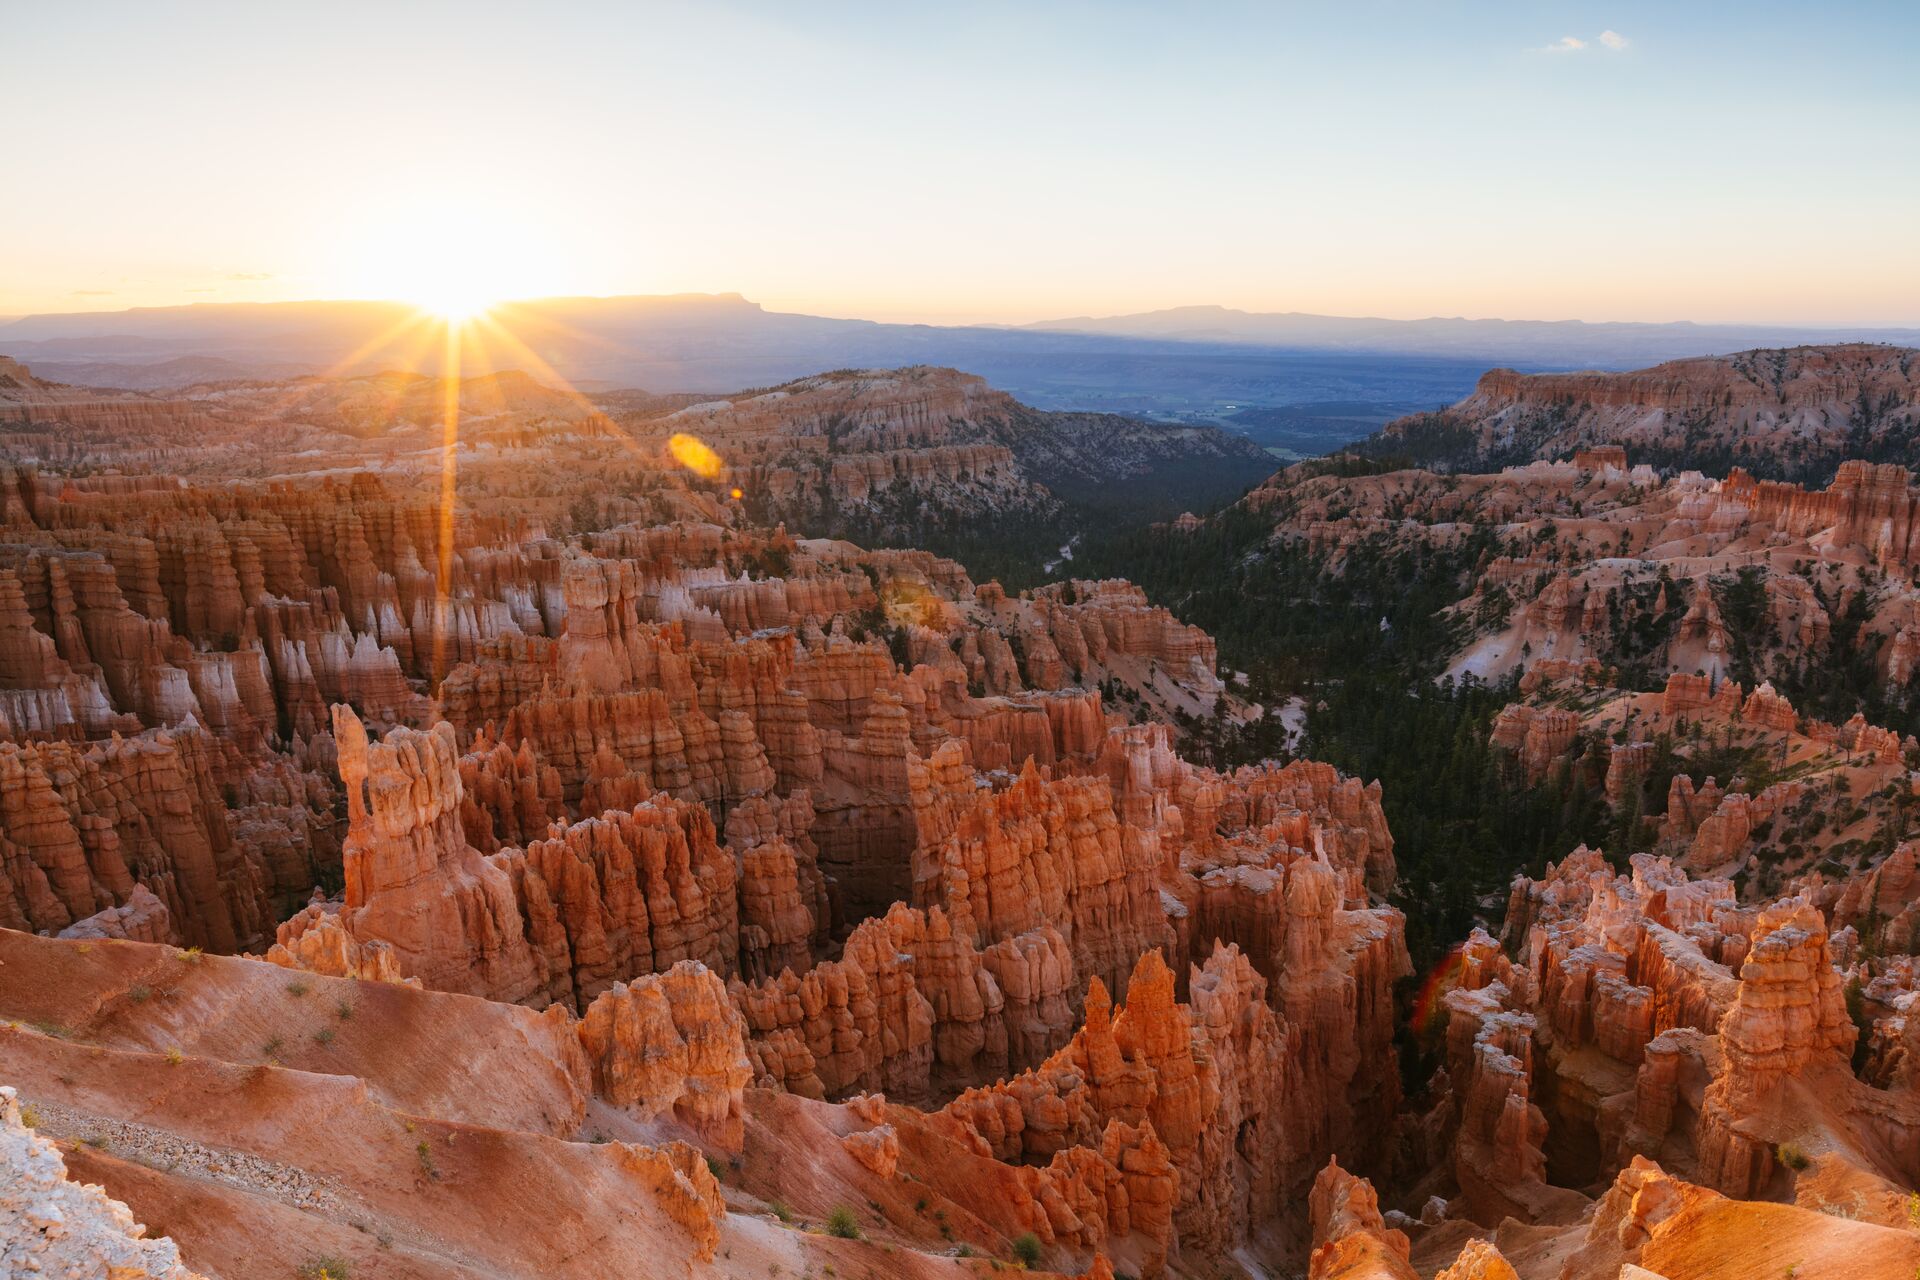 Image fo the sun rise over the Bryce Canyon National Park, over the Hoodoo rock formations glowing warm red